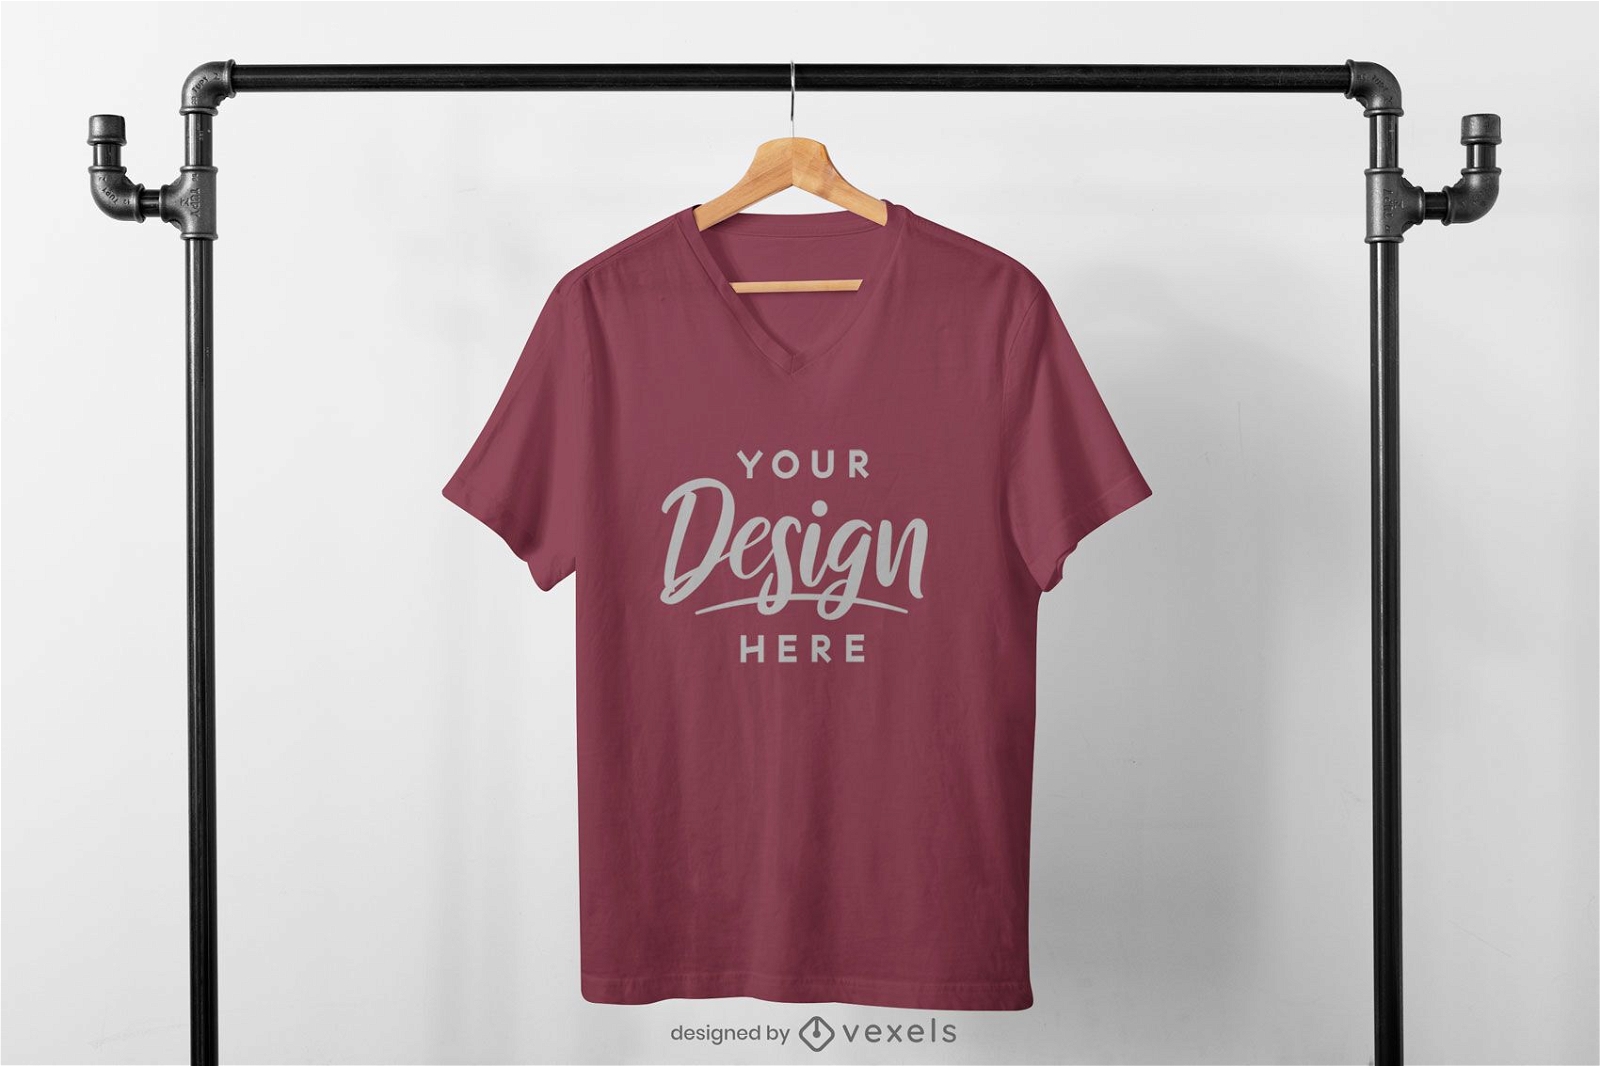 Centered t-shirt in clothing rack mockup